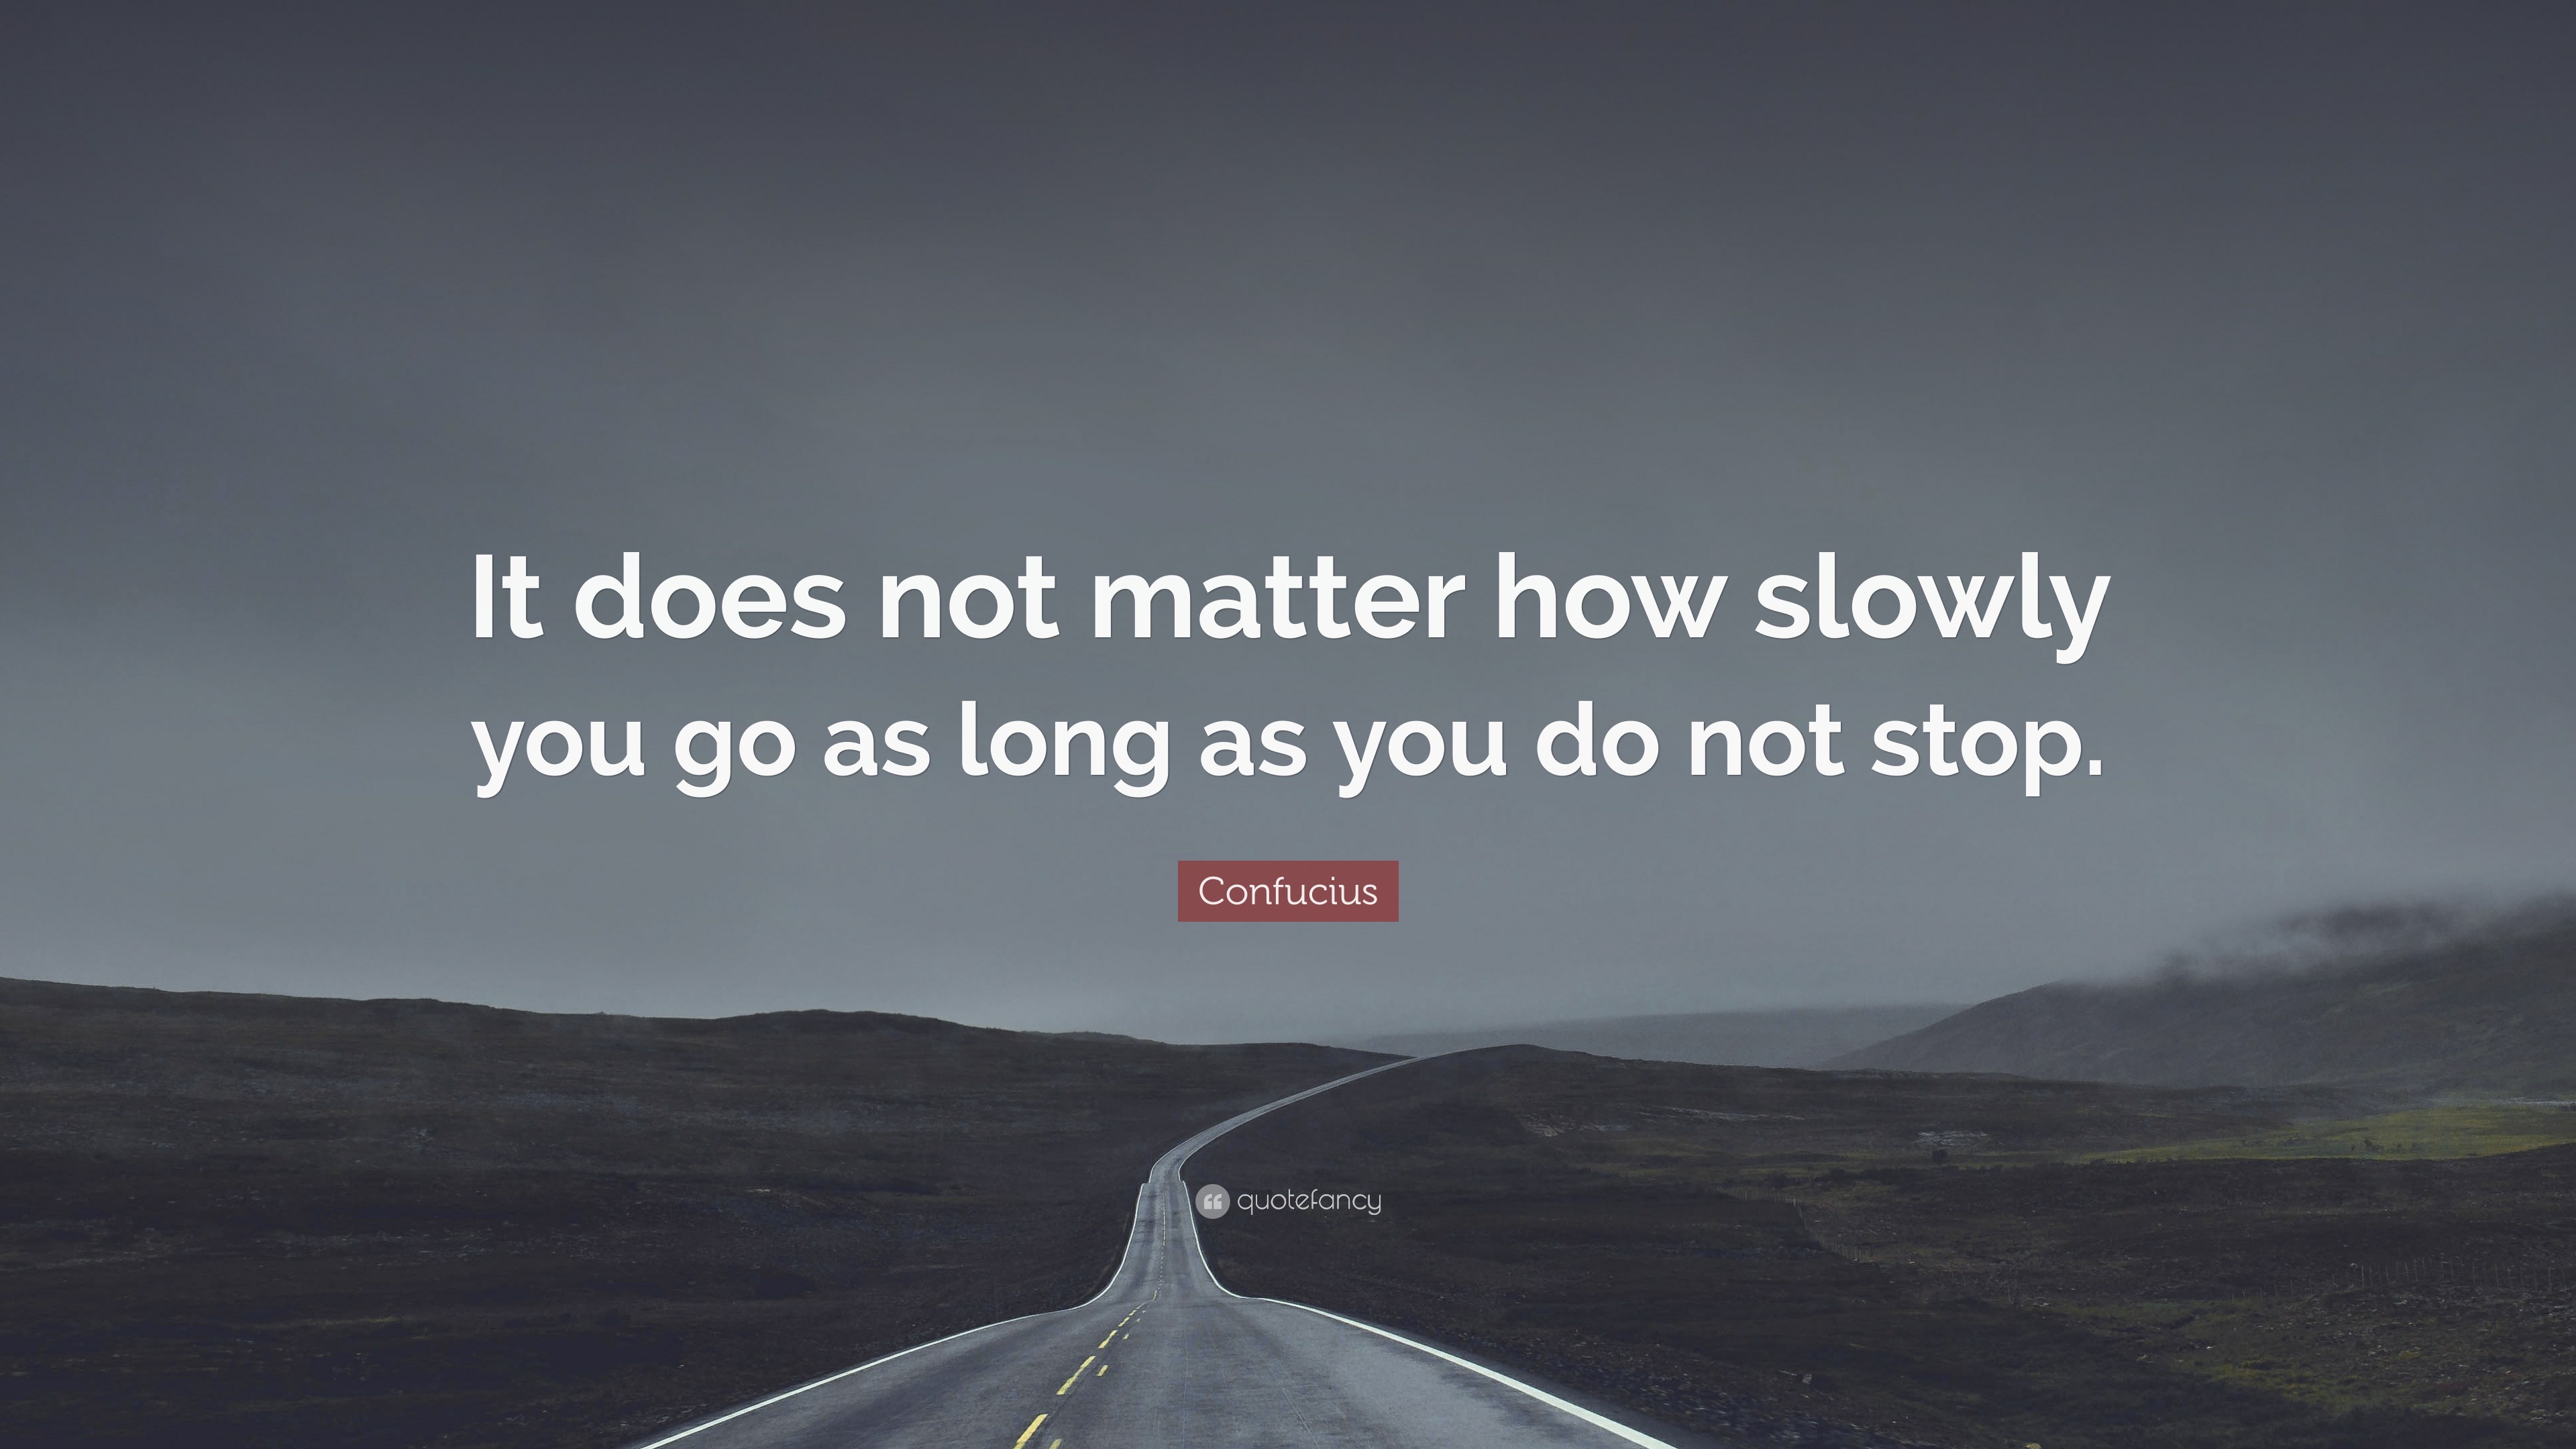 Confucius Quote: “It does not matter how slowly you go as long as you ...